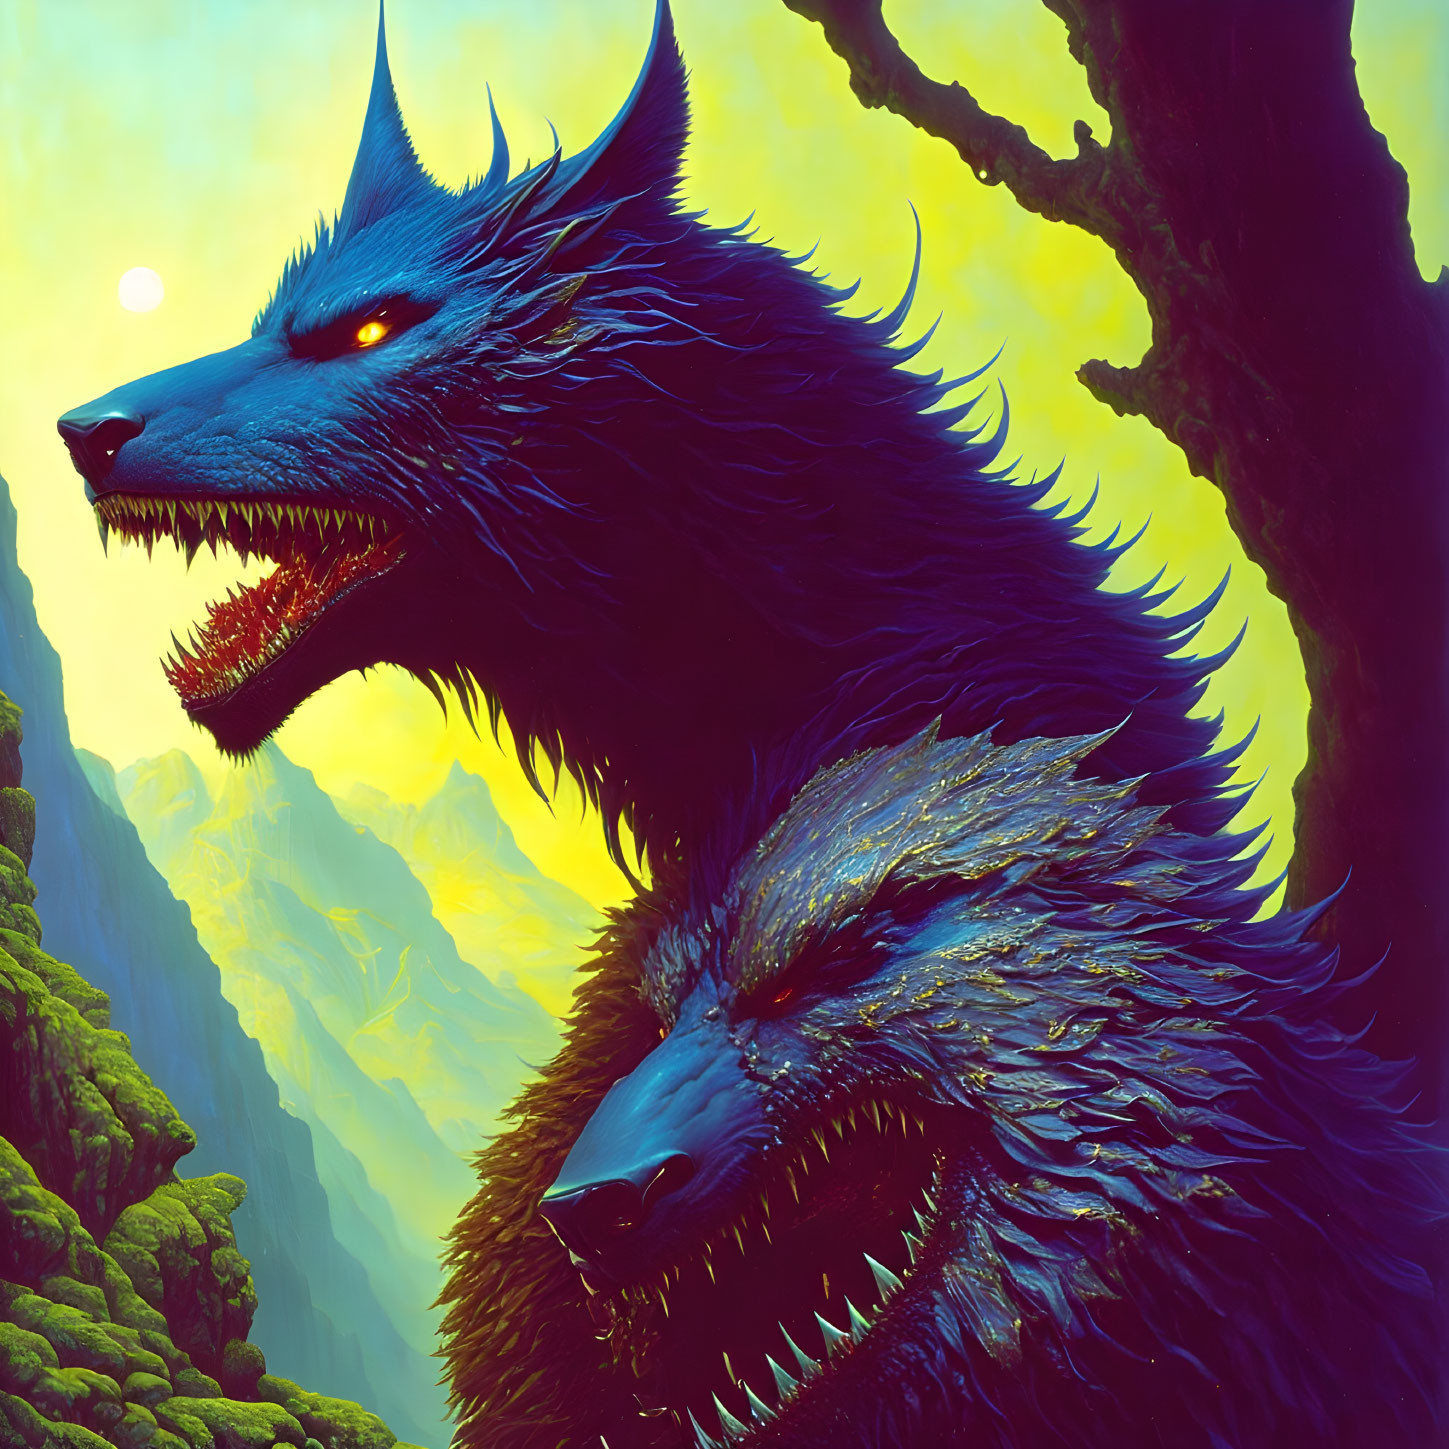 Illustration of two-headed wolf-like creature in yellow sky with mountains.